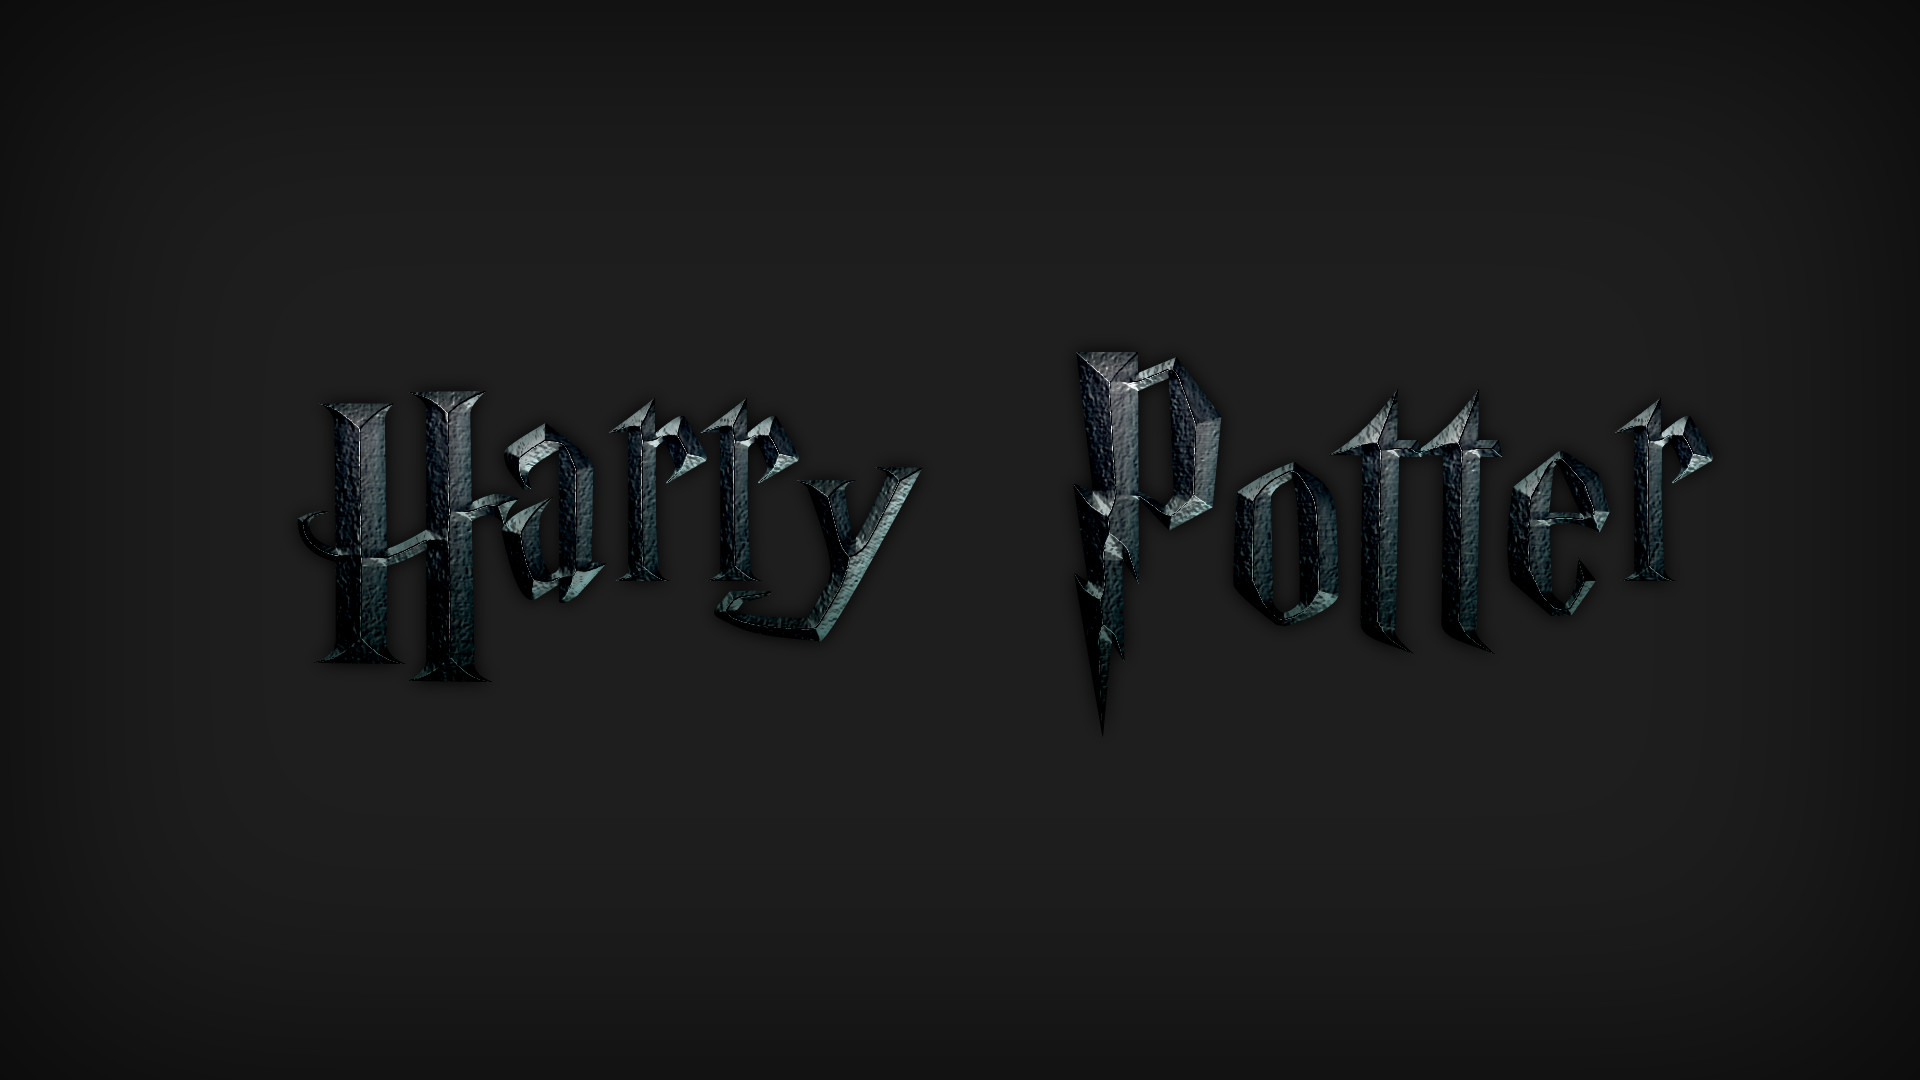 harry potter and the deathly hallows wallpaper